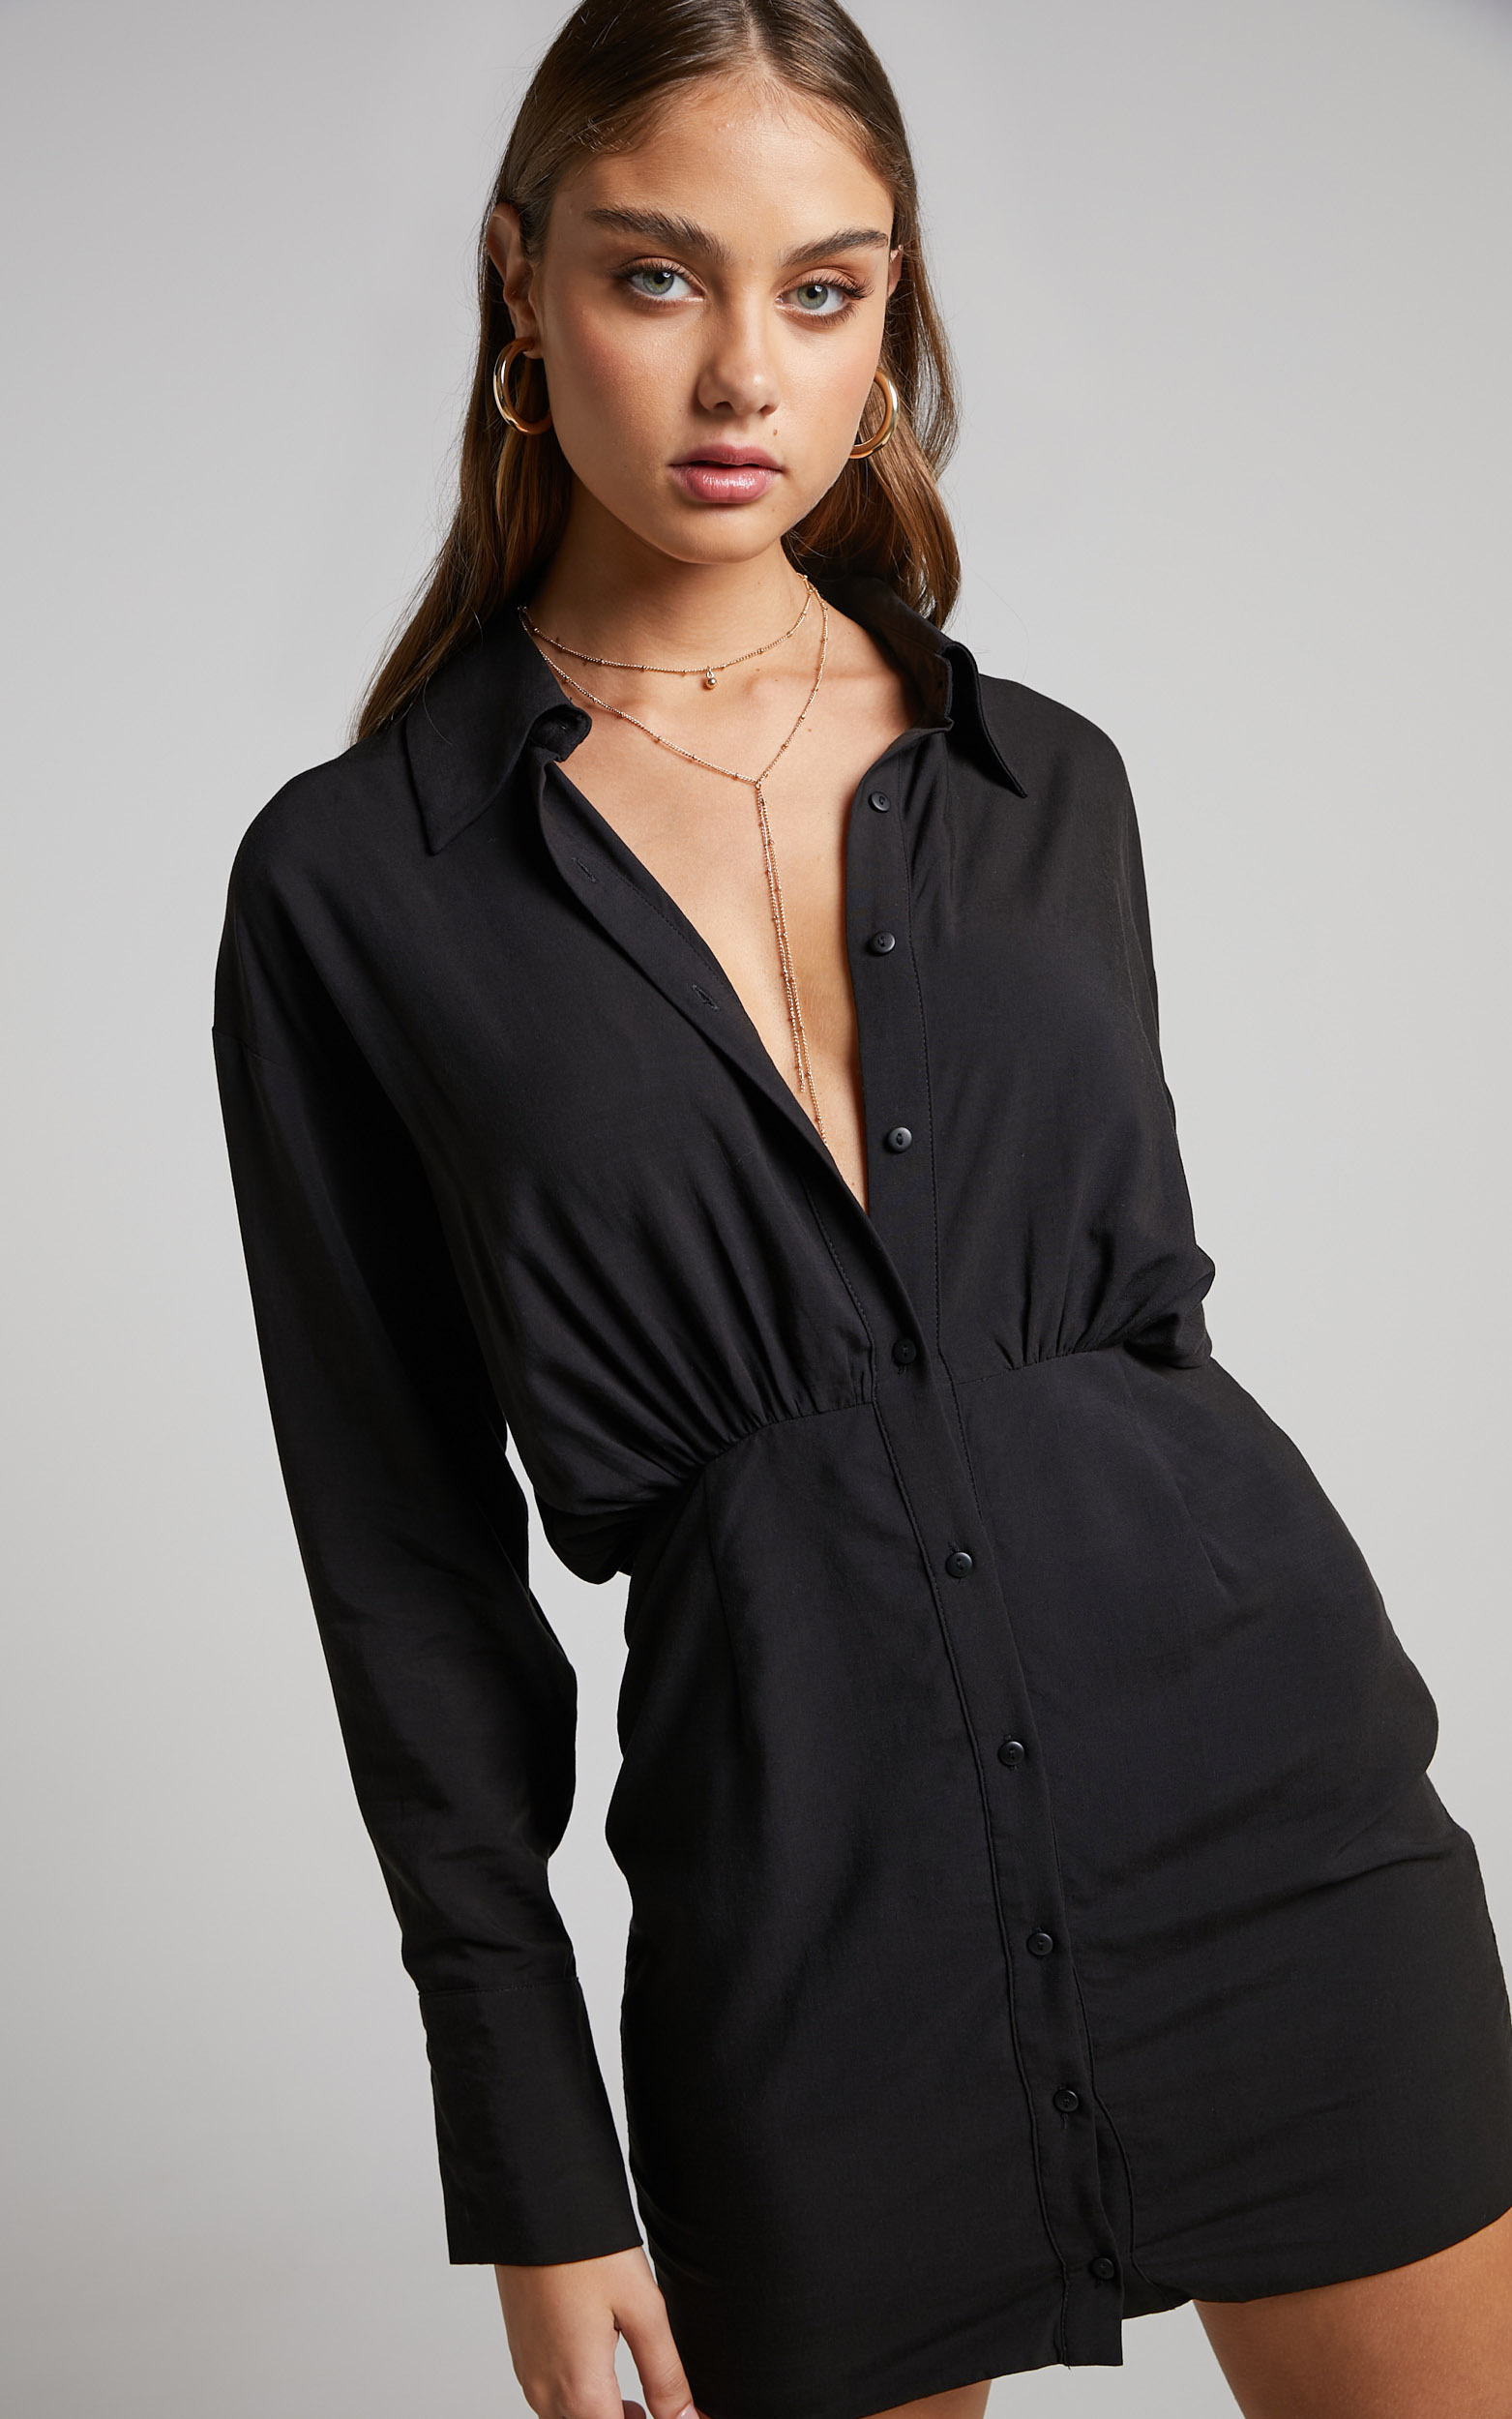 Norie Mini Dress - Button Up Long Sleeve Shirt Dress in Black - 04, BLK1, hi-res image number null